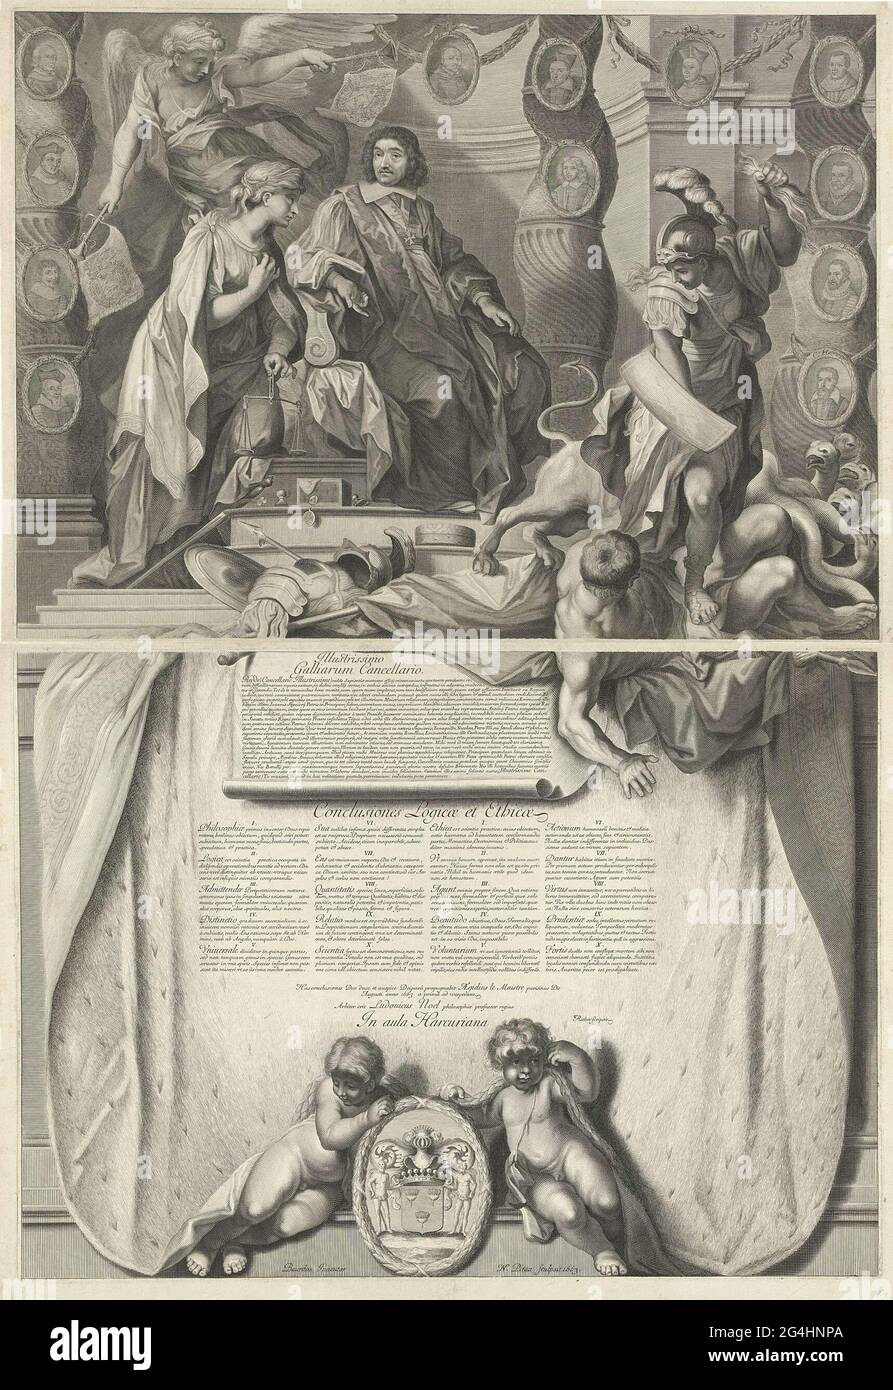 . Announcement of the promotion of Aegidius Le Maistre and the defense of his dissertation 'Concepts Logicae et Ethicae', at the Collège d'Harcourt on August 29, 1663. The French politician Pierre Séguier sits on a throne and points to a roll of paper on which a text indicates With an assignment in Latin. Justice kneels for him. Above fame with bazuin flags on which coat of arms. On columns the portraits of members from the Séguier family. At the top right a wisdom in battle with injustice and the monster of discovery. At the bottom of a summary of the twenty views to defend in Latin. Bye and Stock Photo